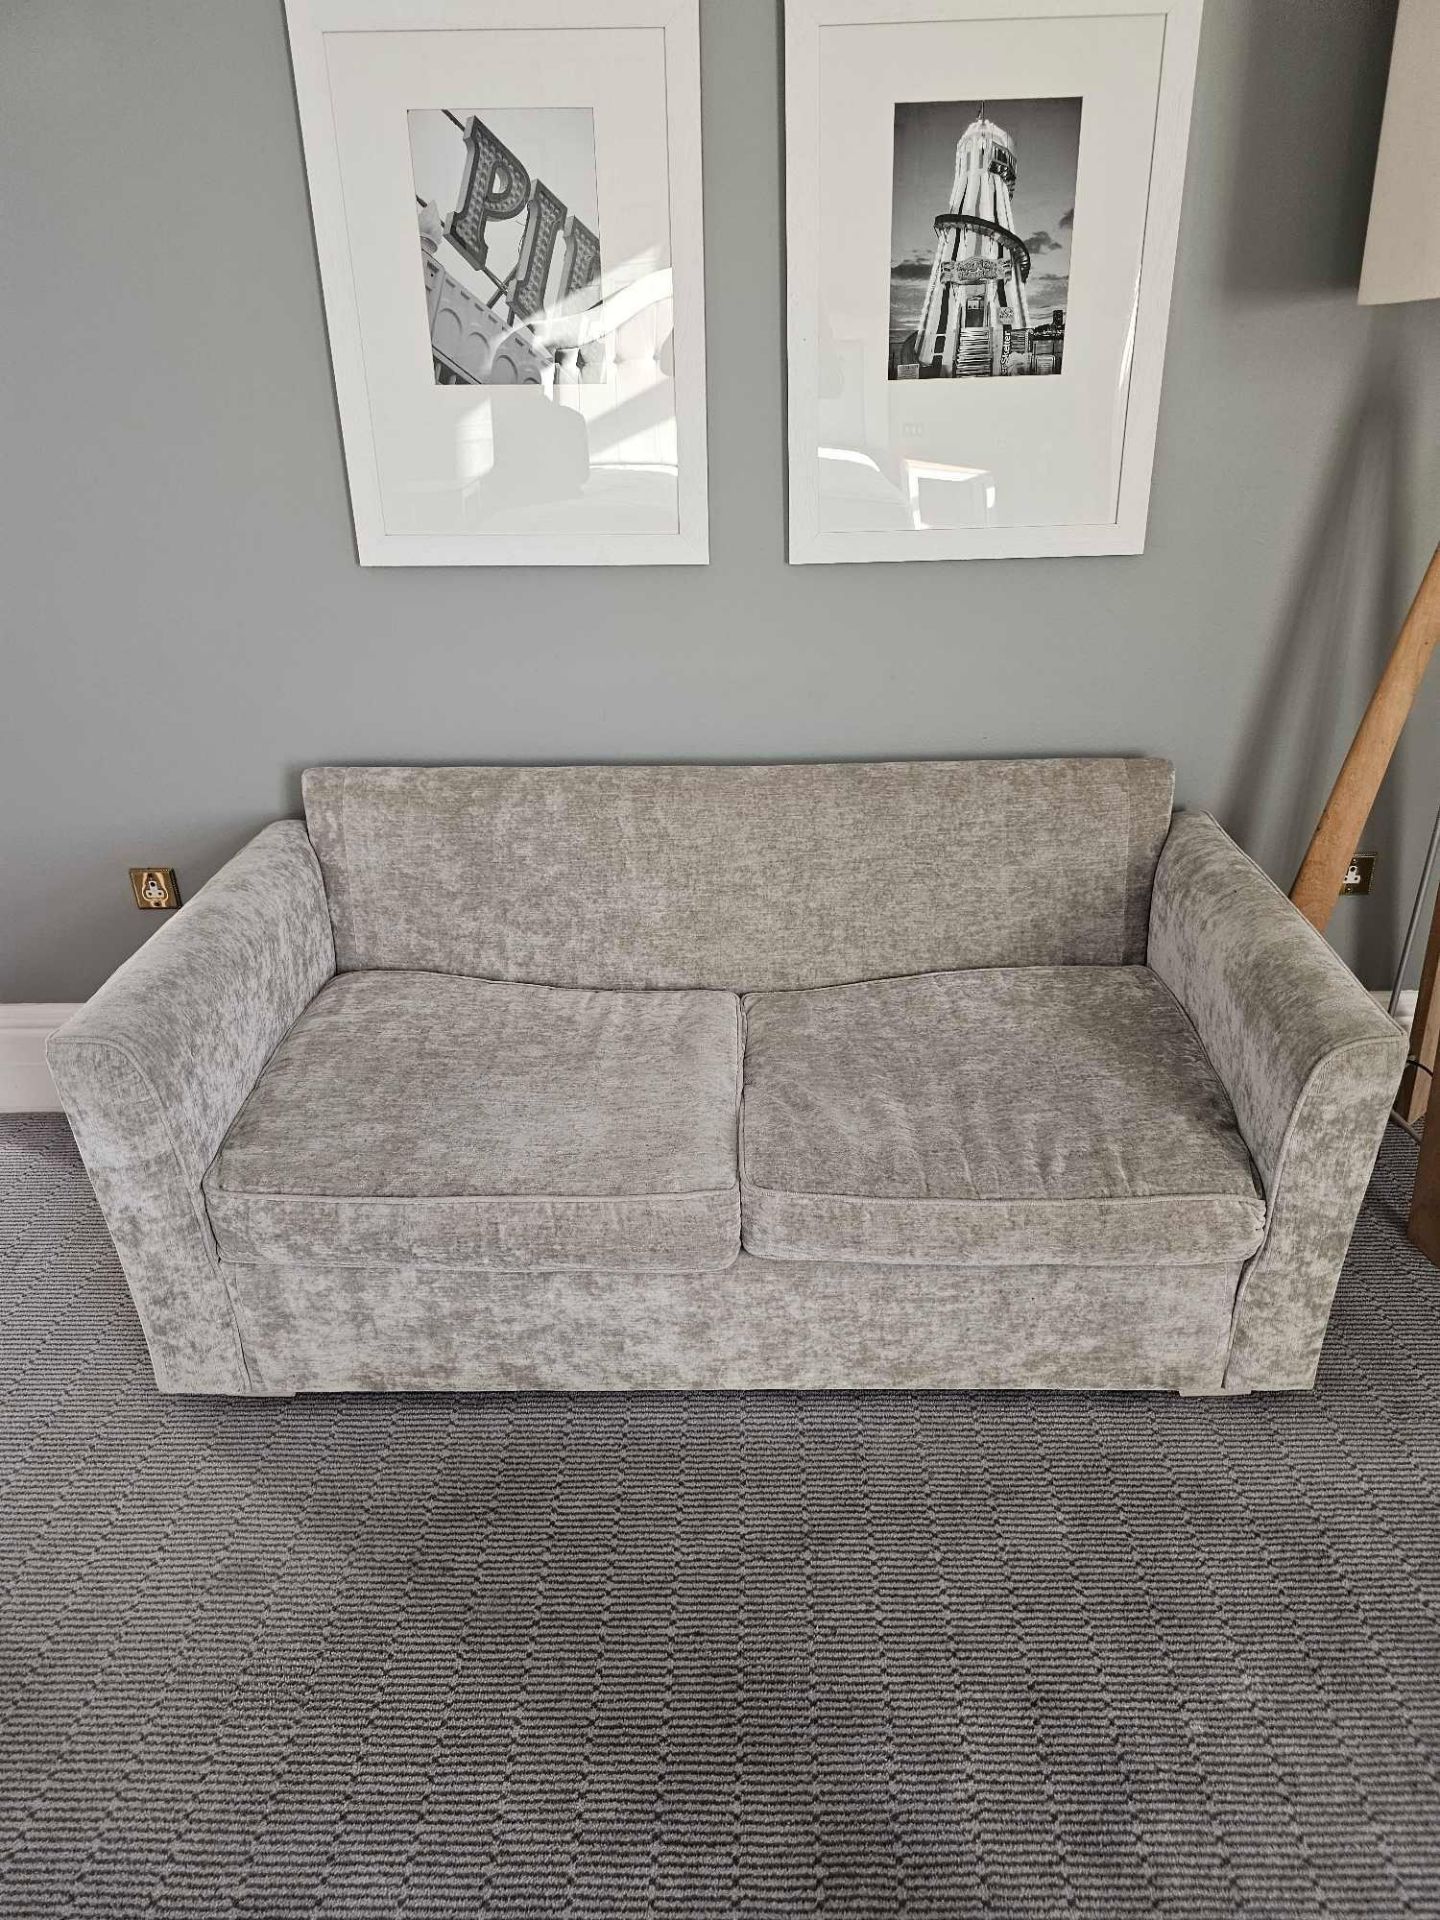 Sofa Bed By Styling Group Italy A Stunning Centrepiece For Any Home That Is Equally Comfortable - Image 2 of 3